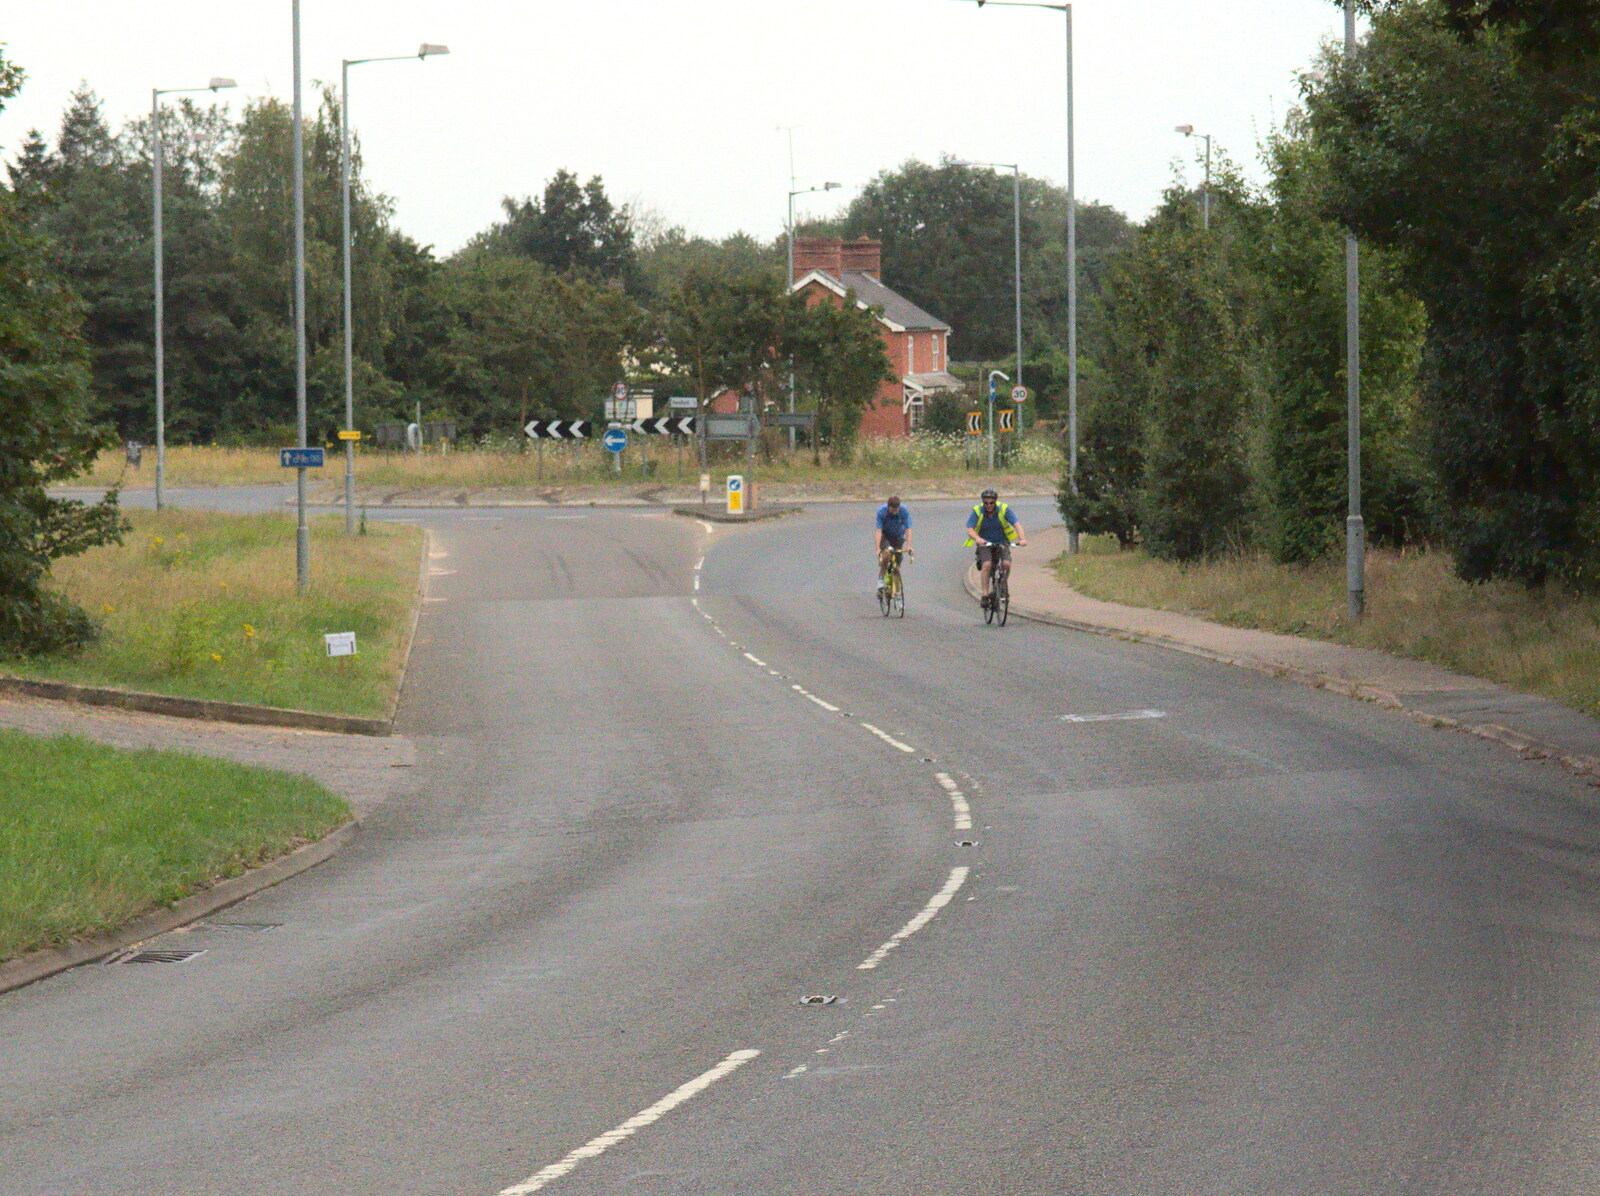 The Boy Phil and Paul on the Needham roundabout from The BSCC at Harleston, and a Visit From Cambridge, Brome, Suffolk - 31st July 2014